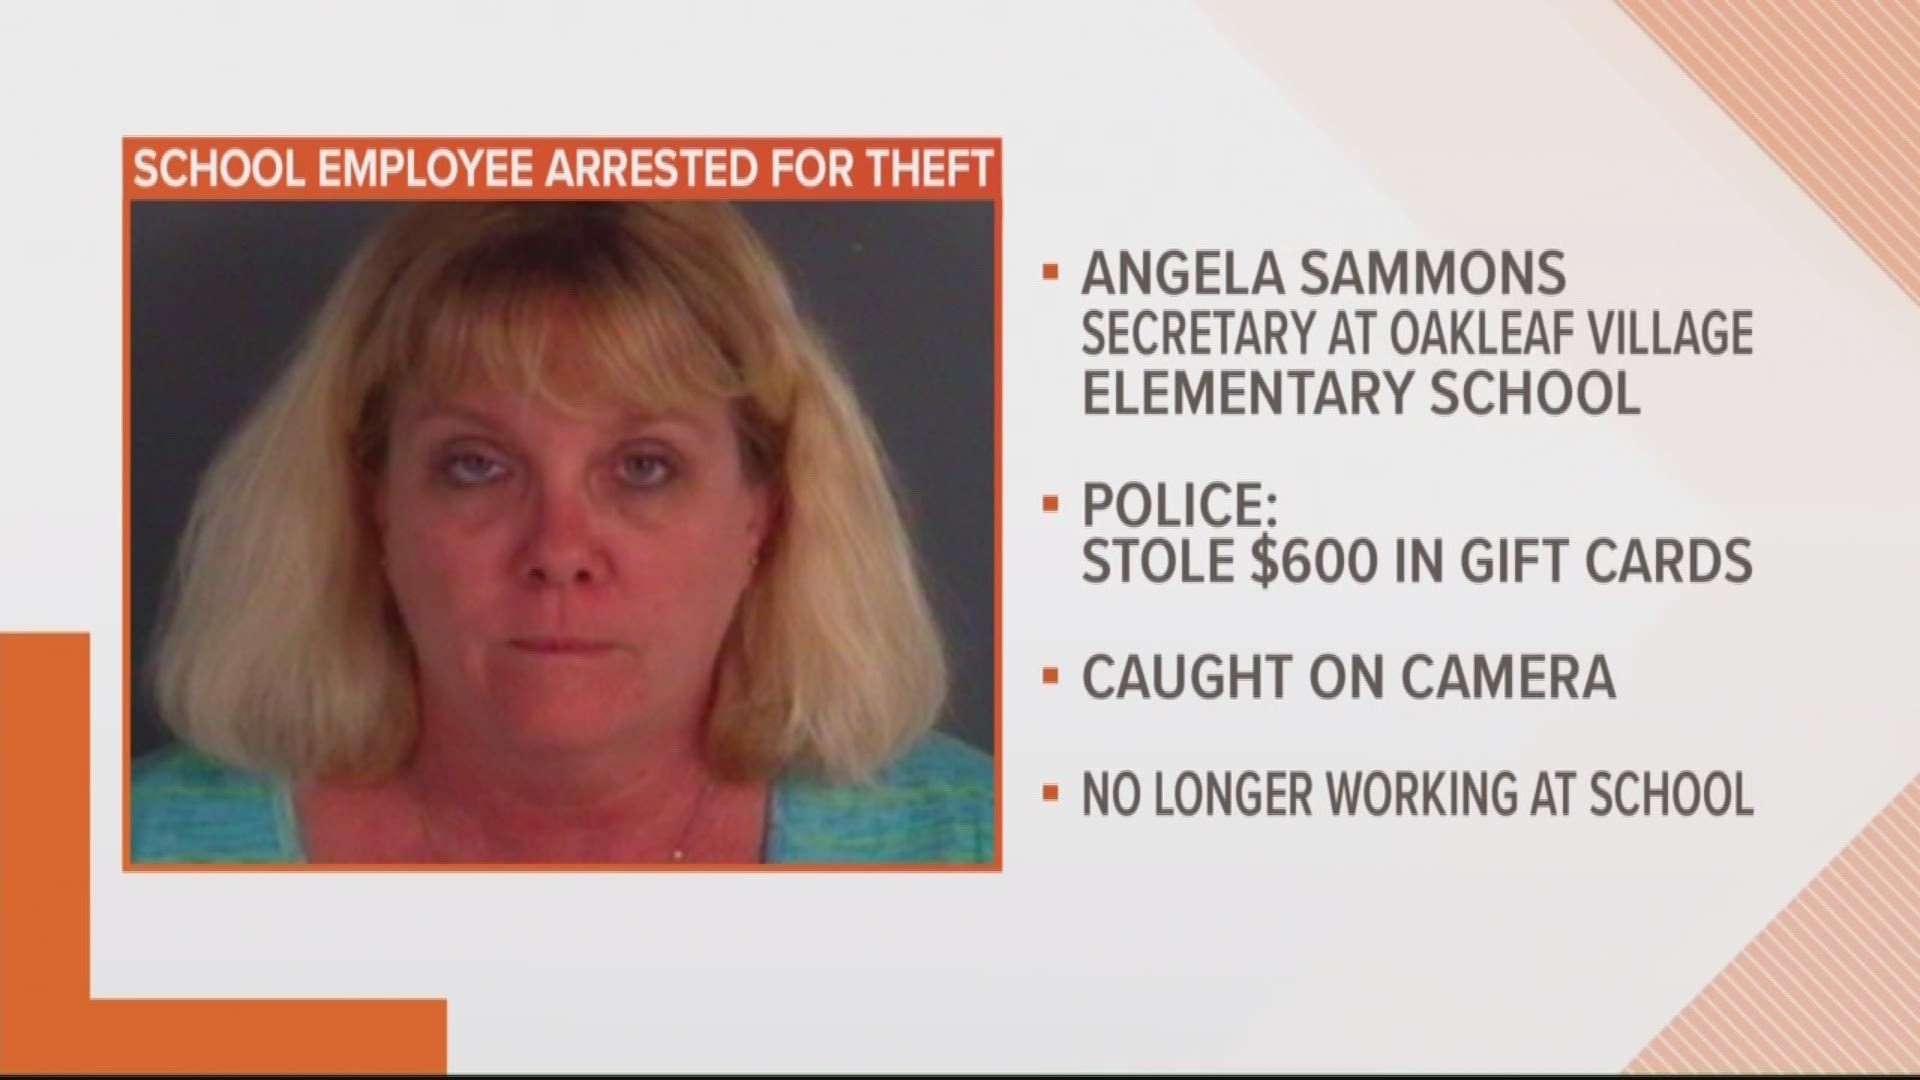 The Clay County Sheriff's Office says Angela Sammons, a former employee at Oakleaf Village Elementary, stole around $600 worth of Aldi gift cards in September.